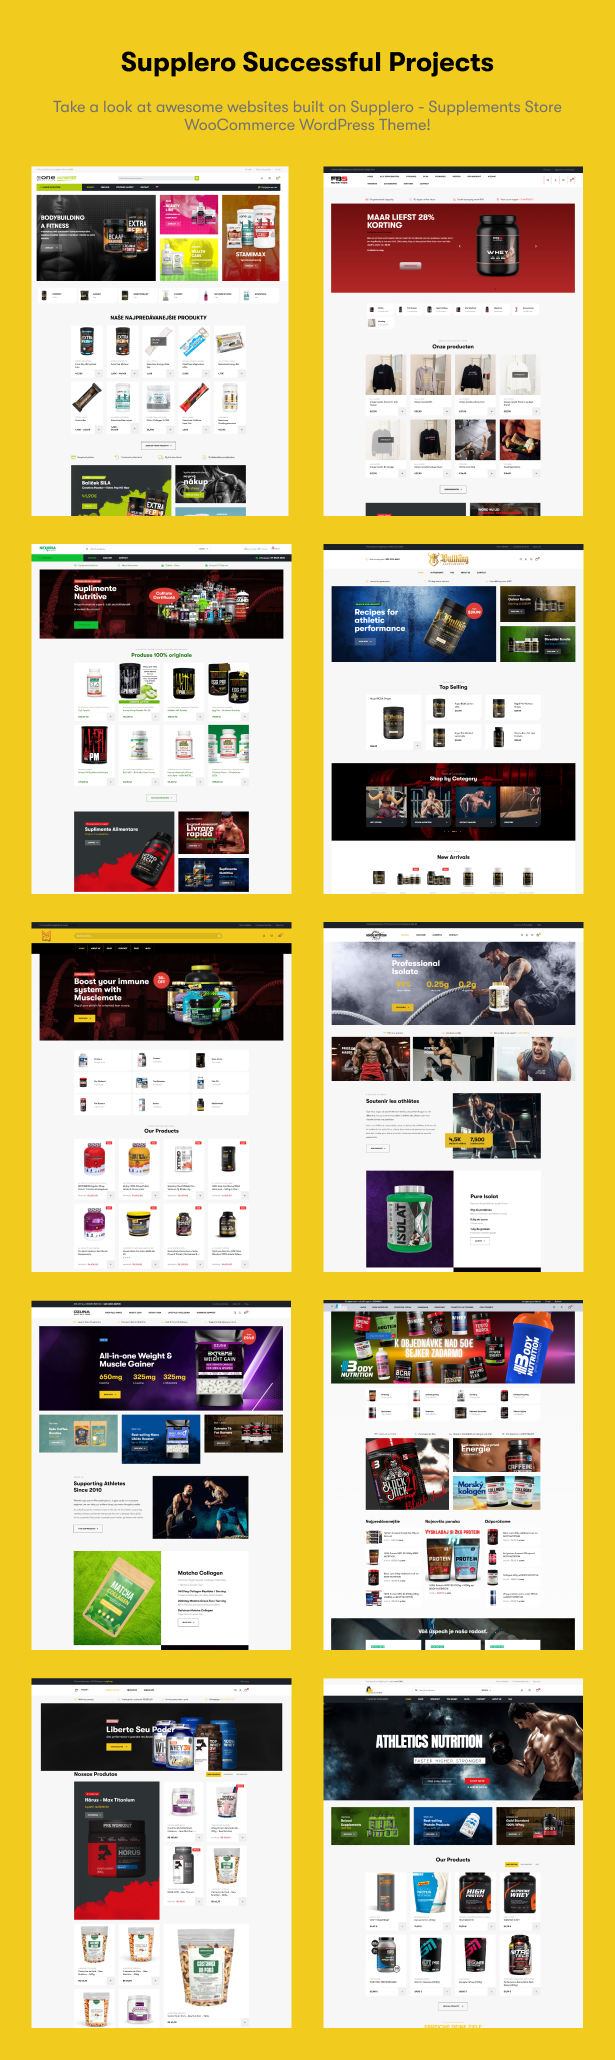 Supplero - Supplement Store WooCommerce Theme Review